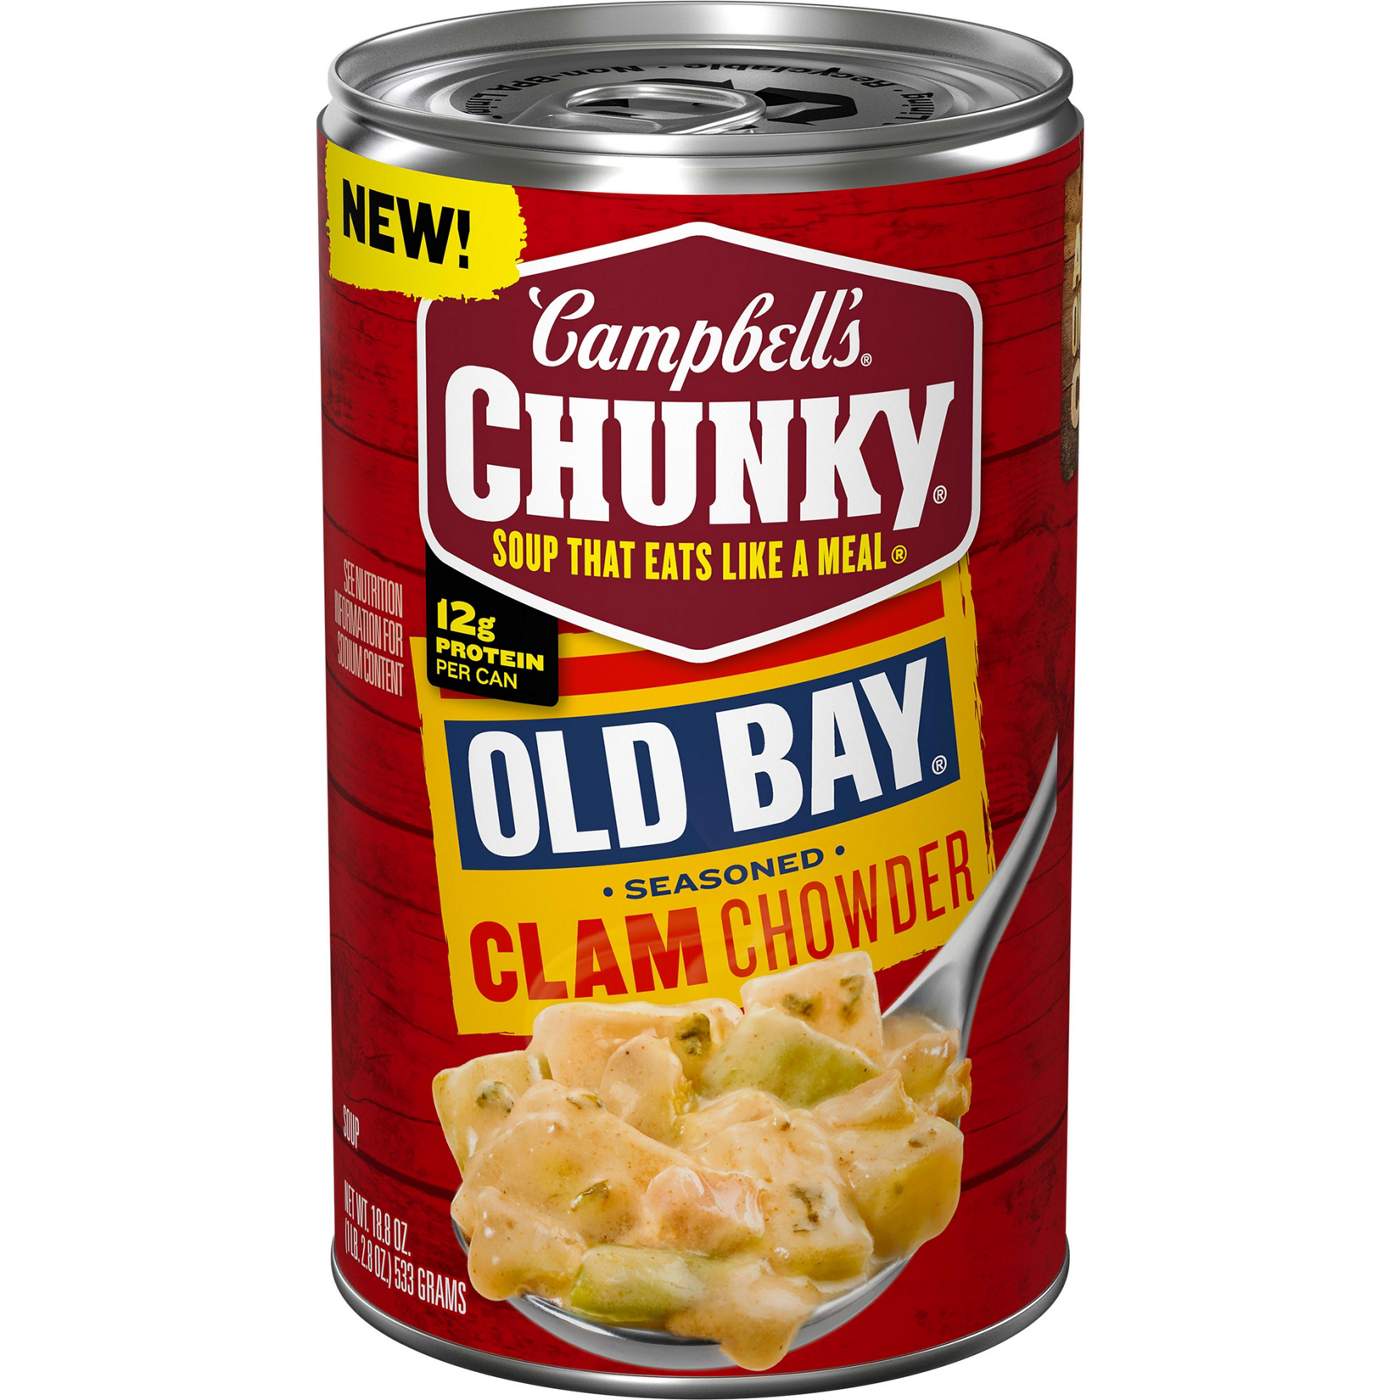 Campbell's Chunky Old Bay Clam Chowder; image 1 of 5